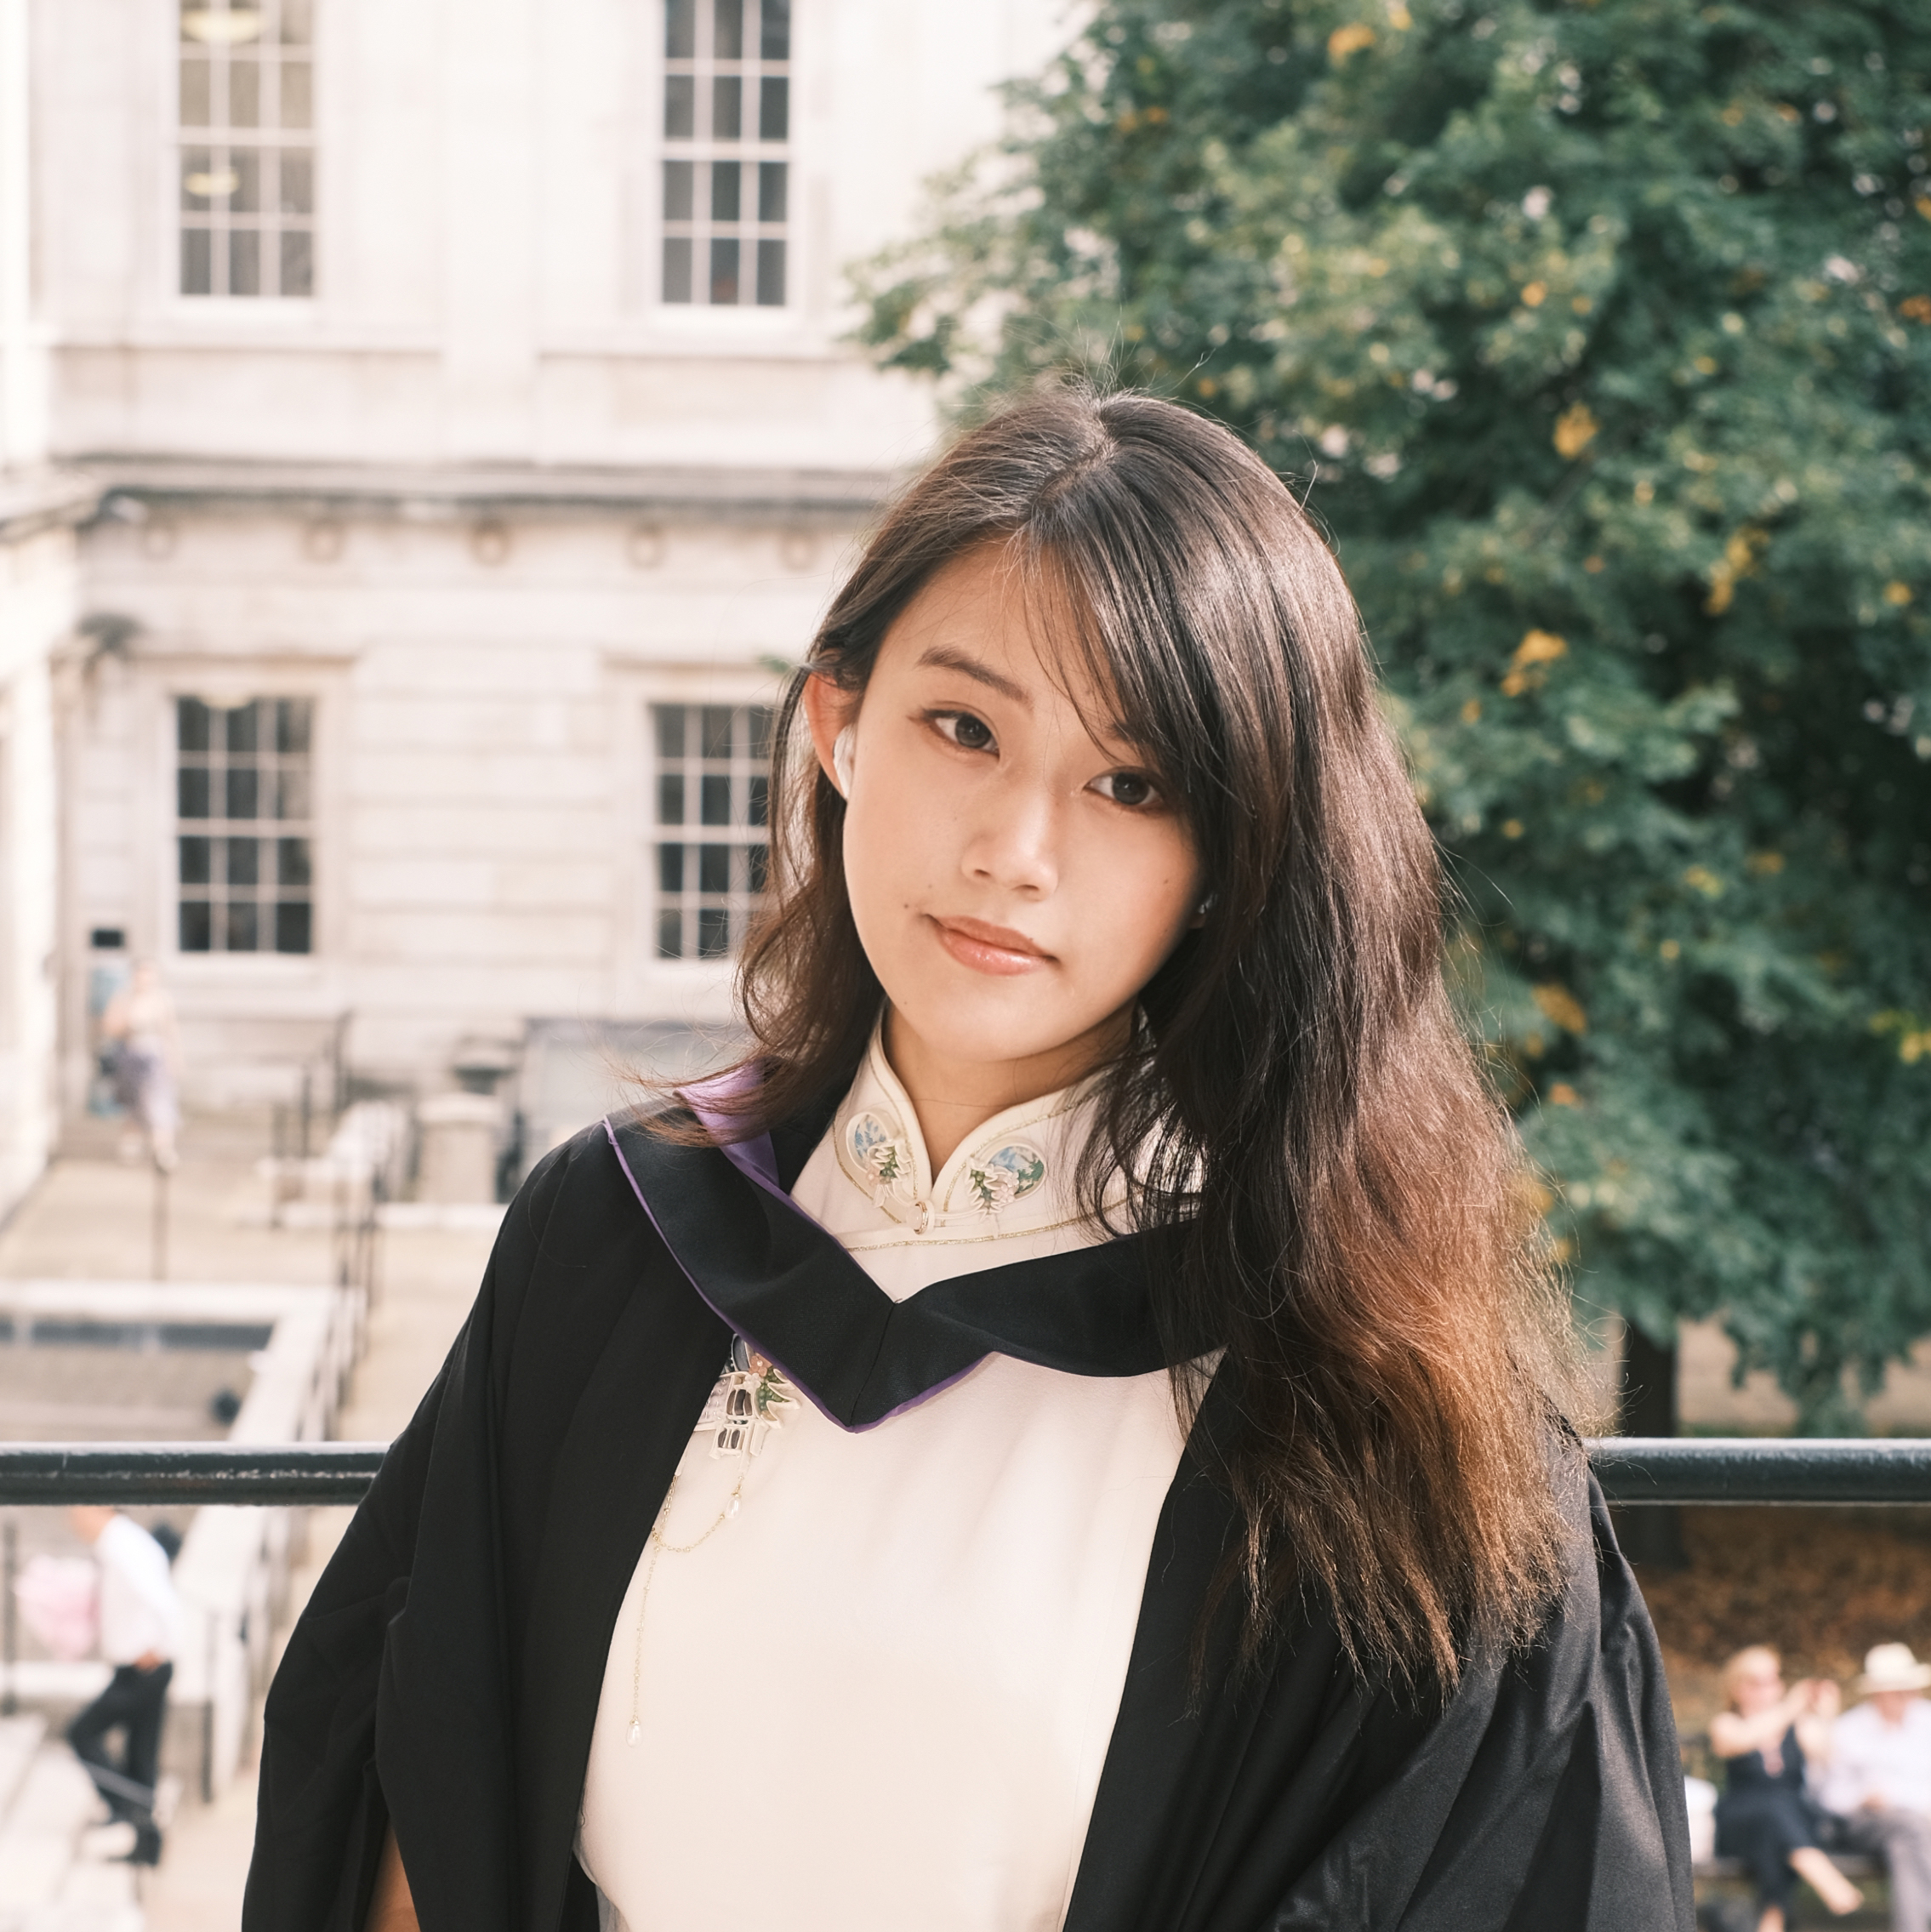 Photograph of Yuxi in graduation robes at the UCL Portico